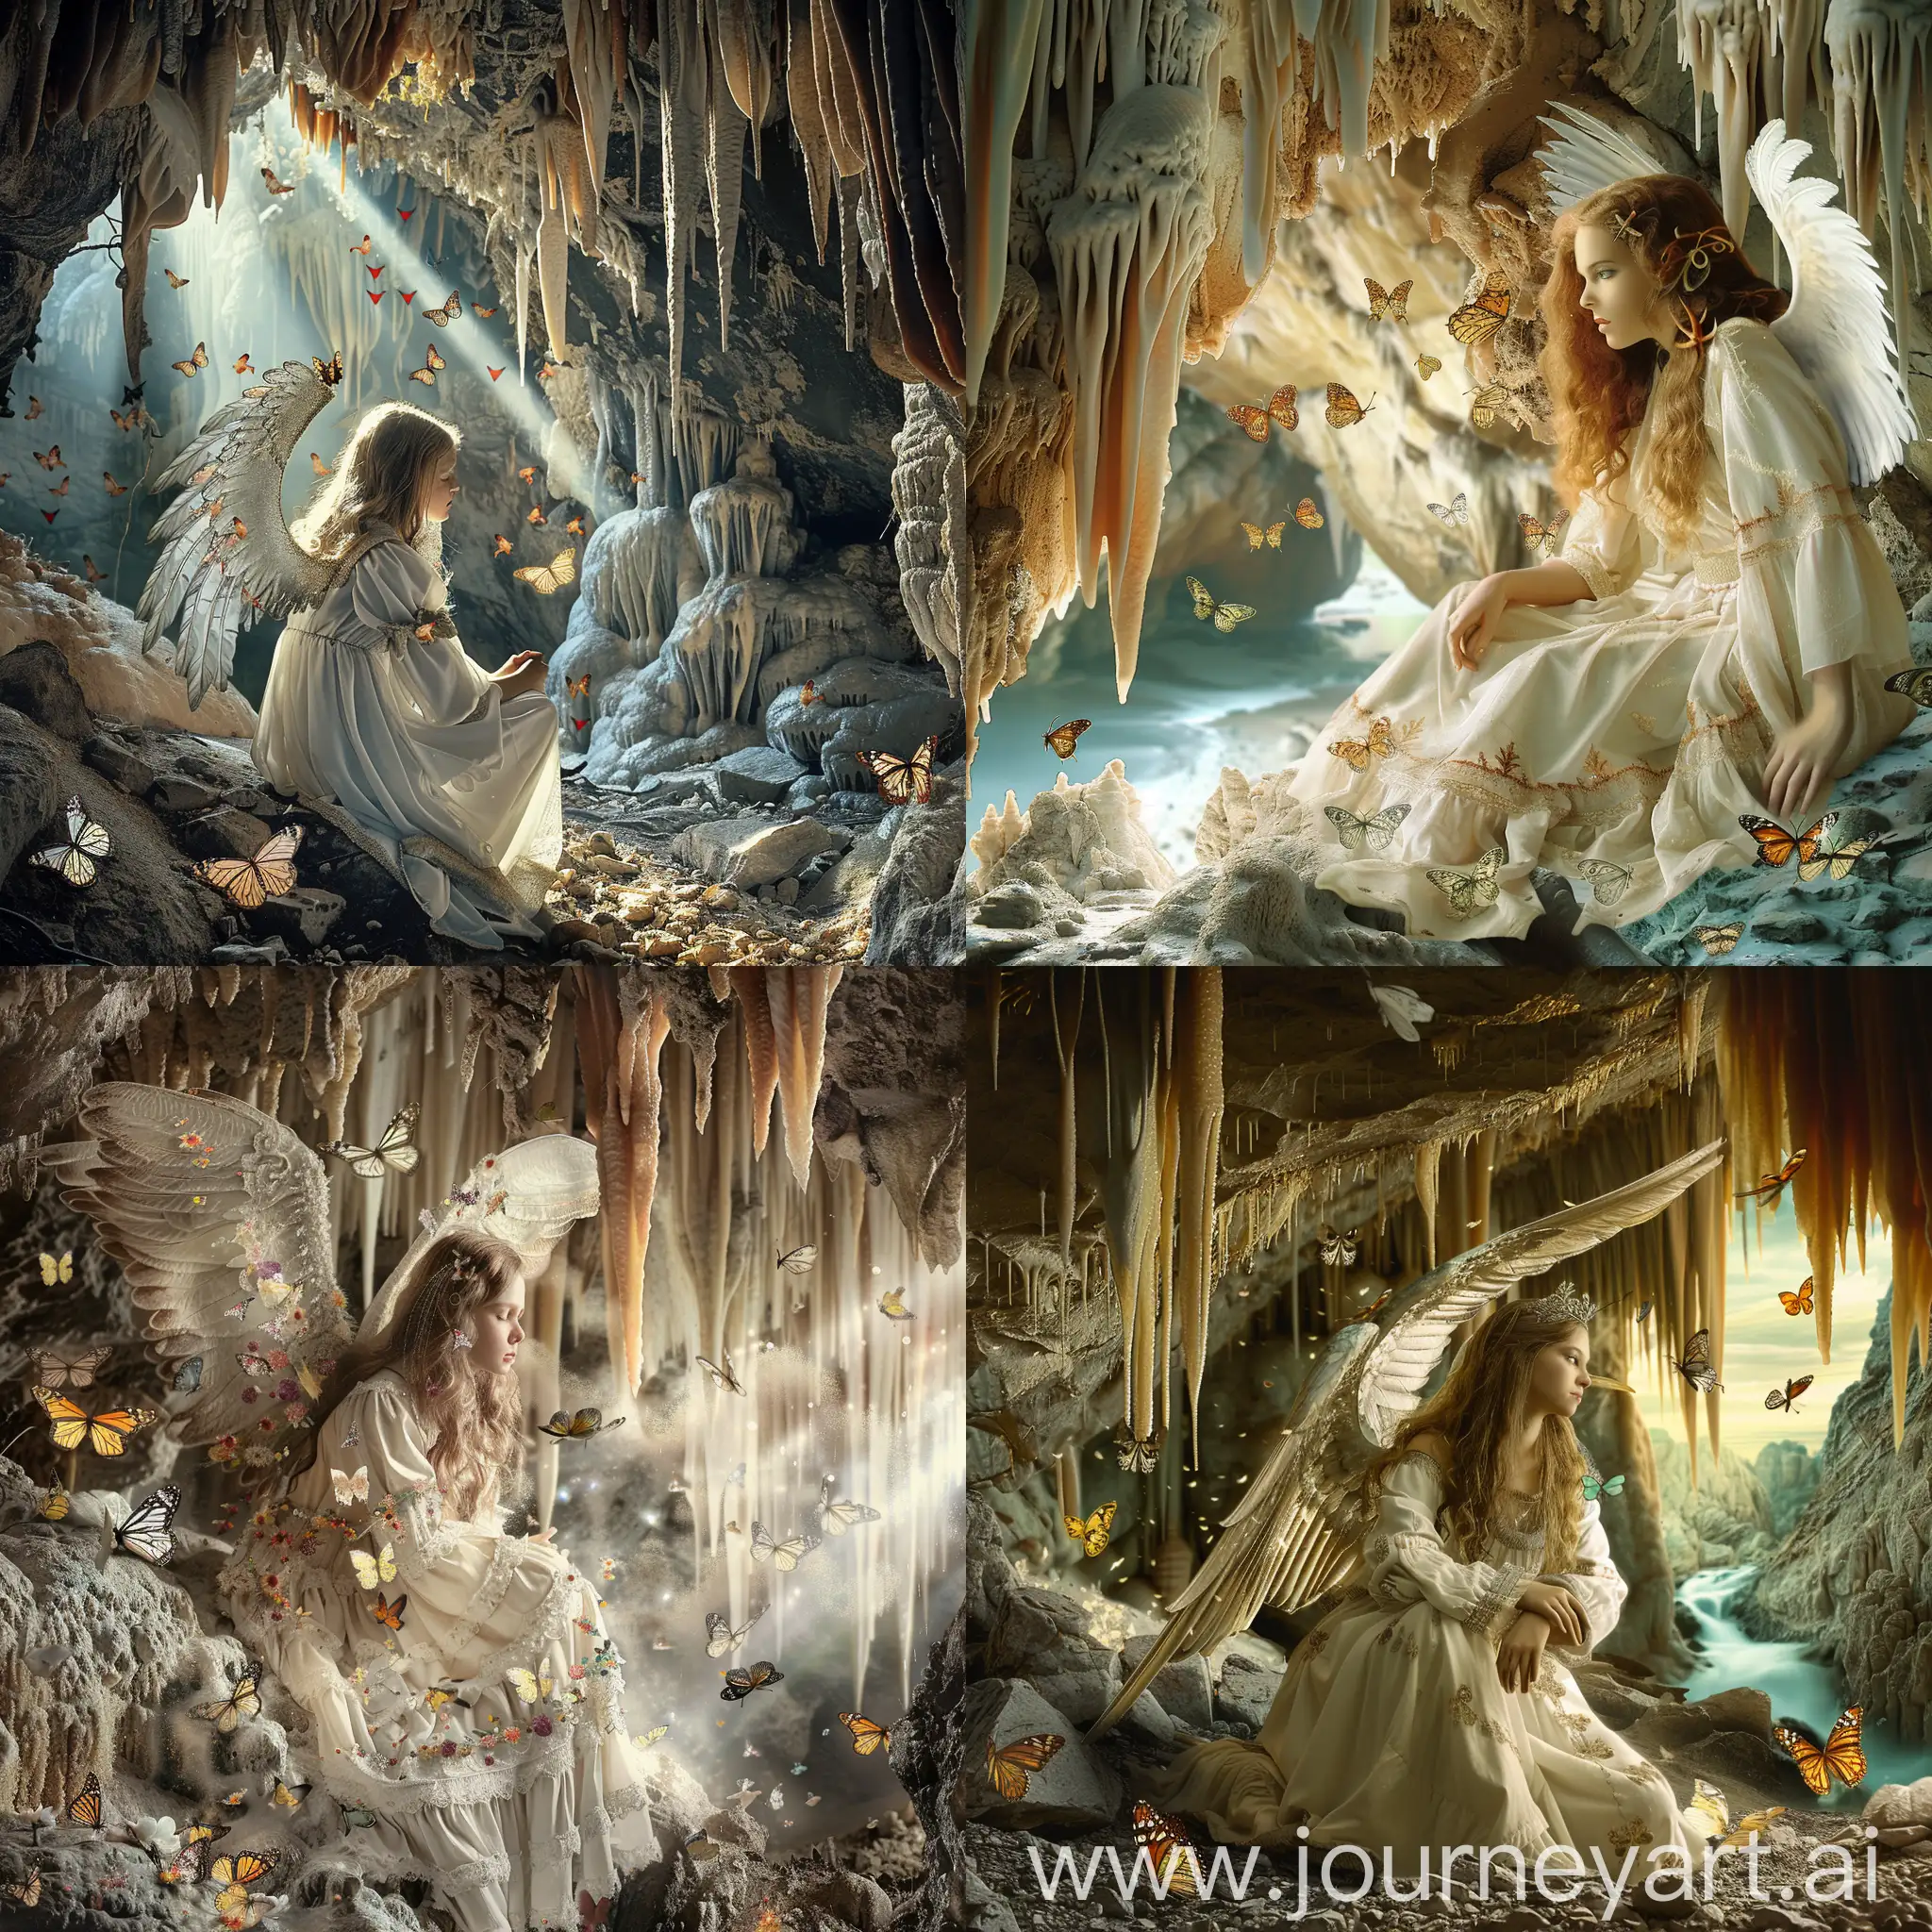 Medieval-Angel-in-Cave-with-Stalagmites-and-Stalactites